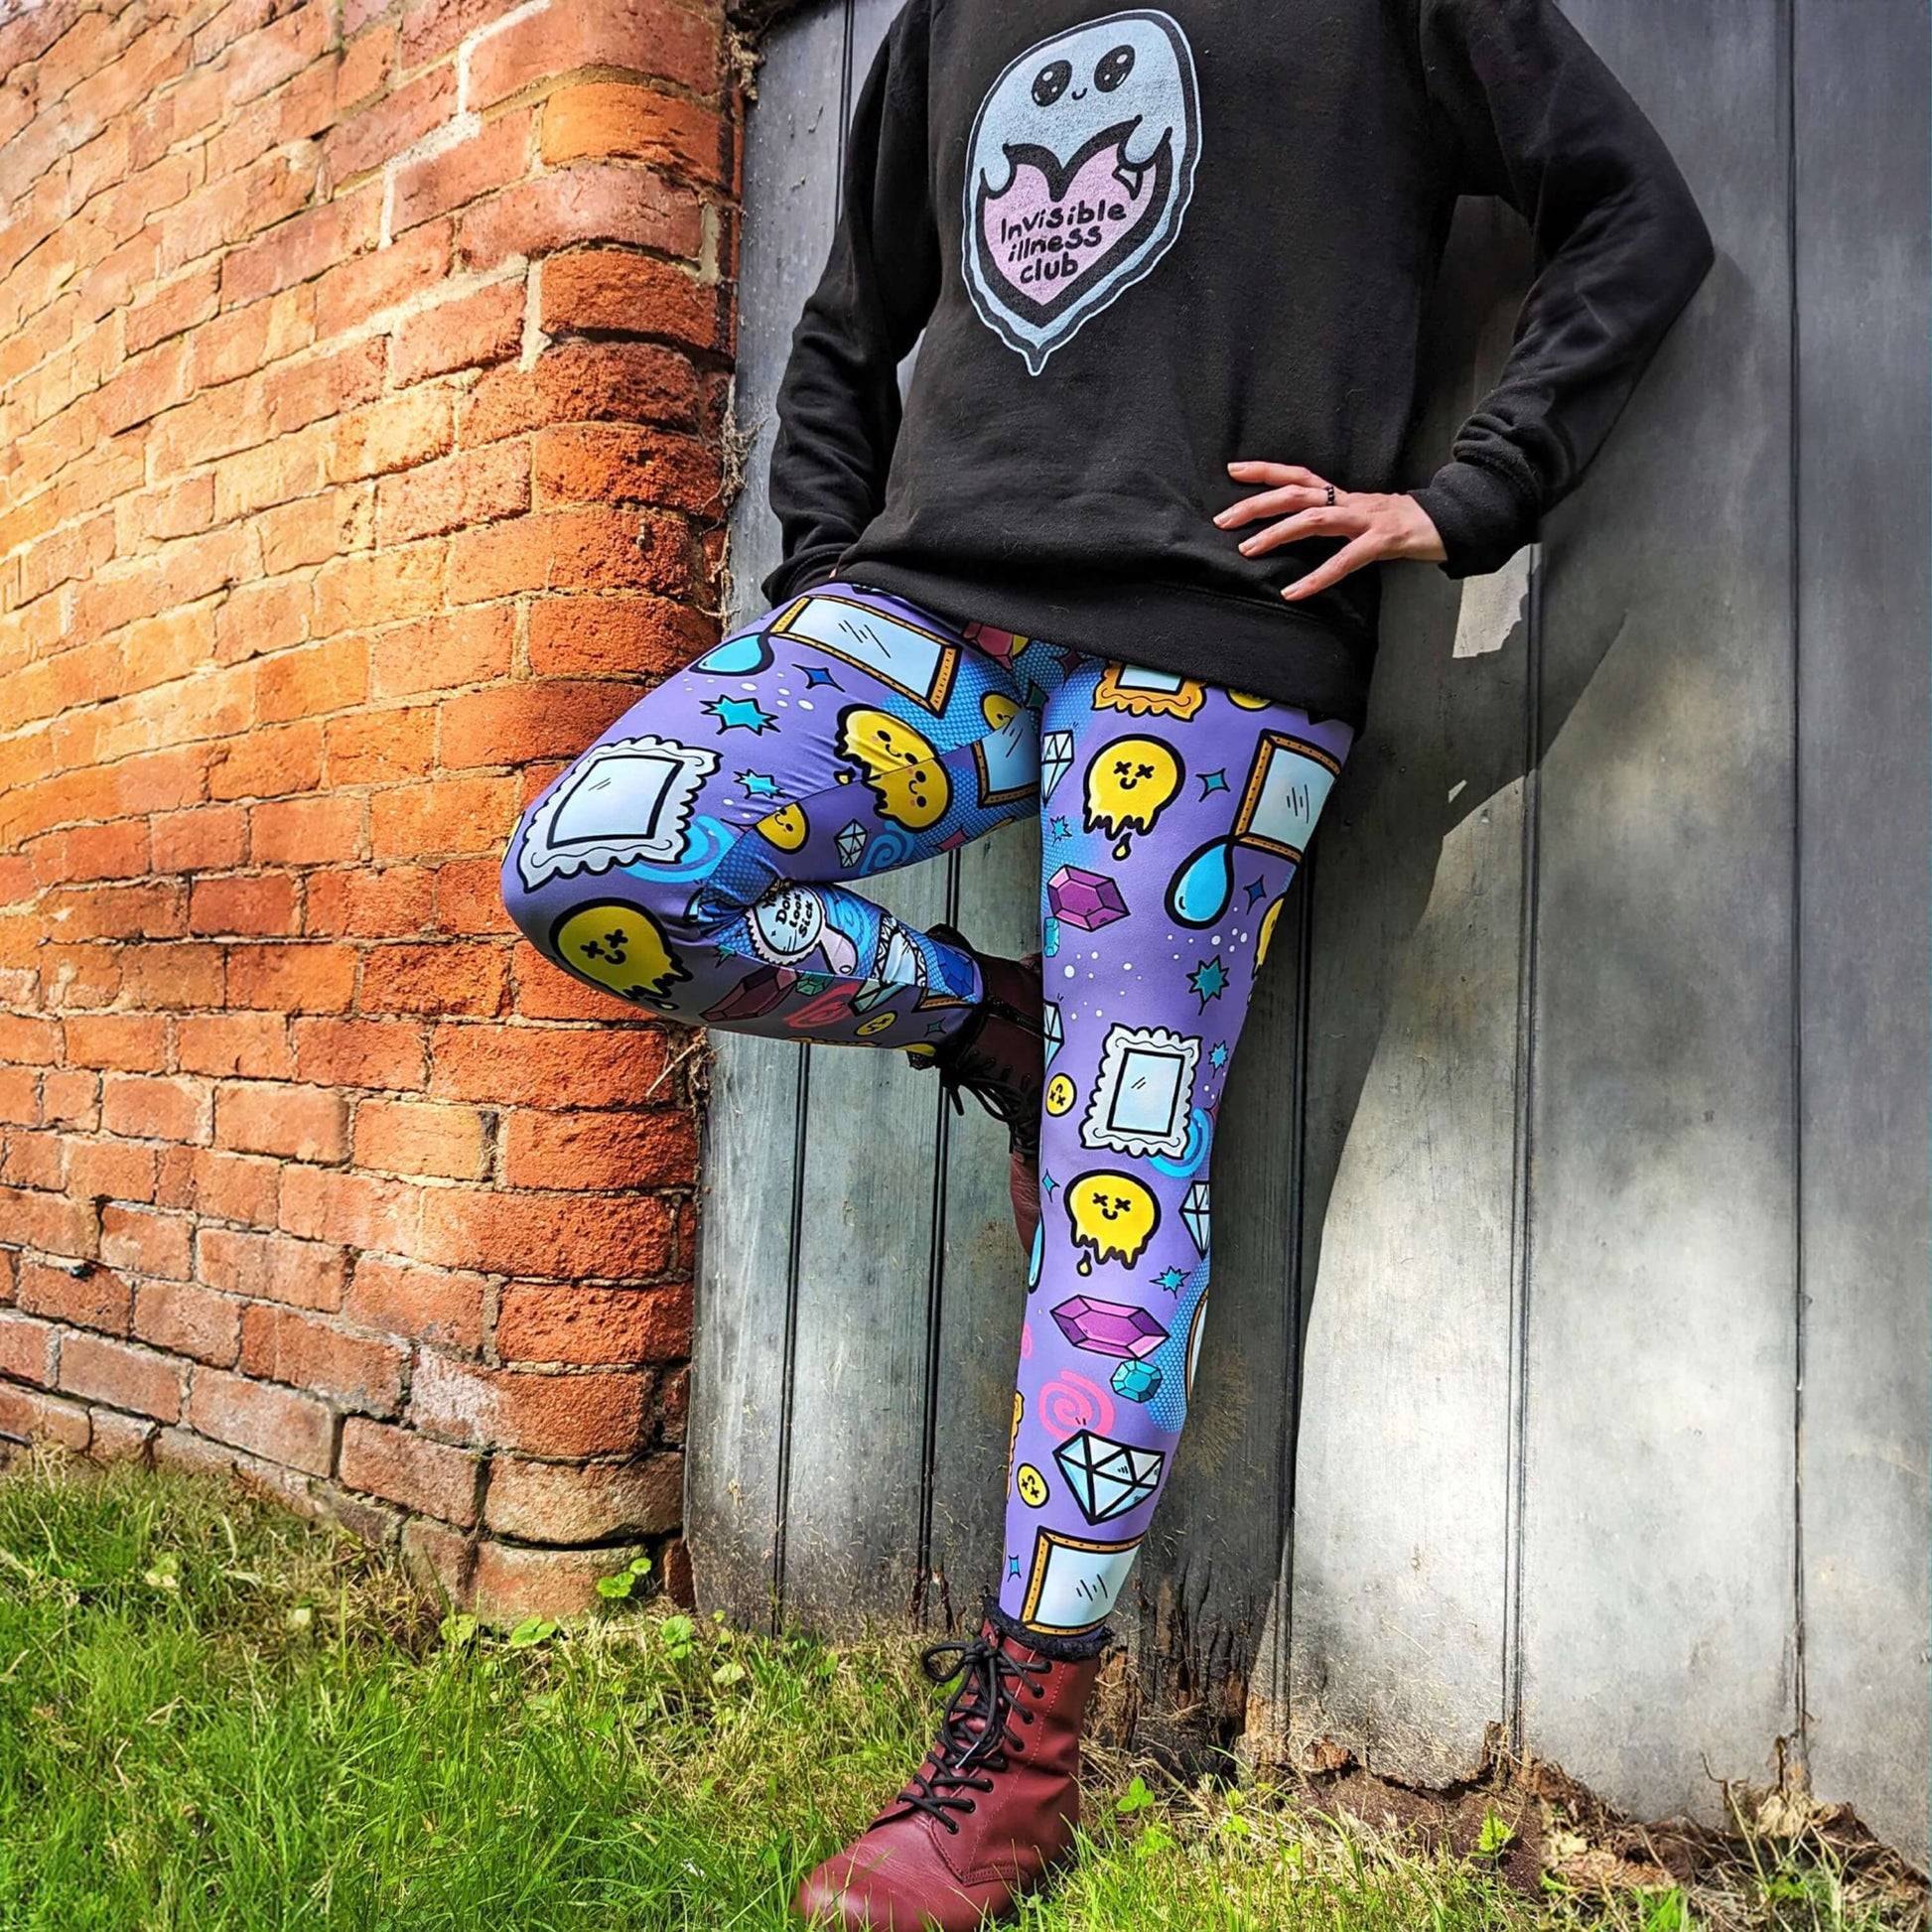 The You Don't Look Sick Leggings modelled by the owner of Innabox Nikky with red boots and the innabox invisible illness club sweater. She is leaning back on a wooden door next to a brick wall. The purple base leggings features melting yellow smiley faces, mirrors, gemstones, teardrops, sparkles, swirls and dots with a centre hand held mirror reading 'you don't look sick'. The hand drawn design is raising awareness for invisible illnesses.